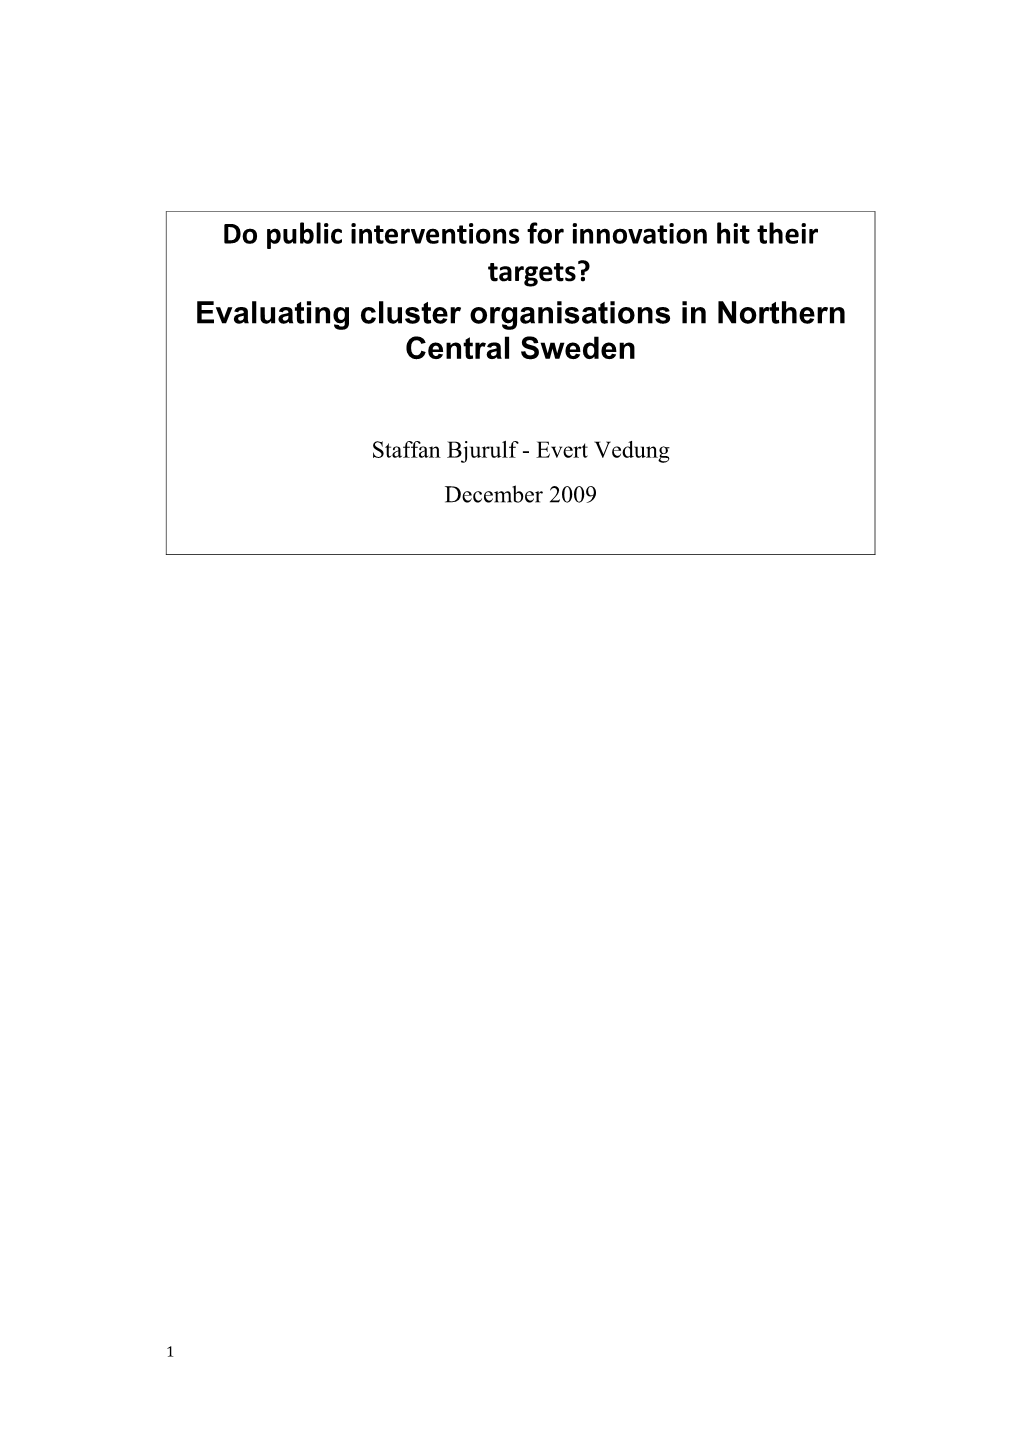 Do Public Interventions for Innovation Hit Their Targets